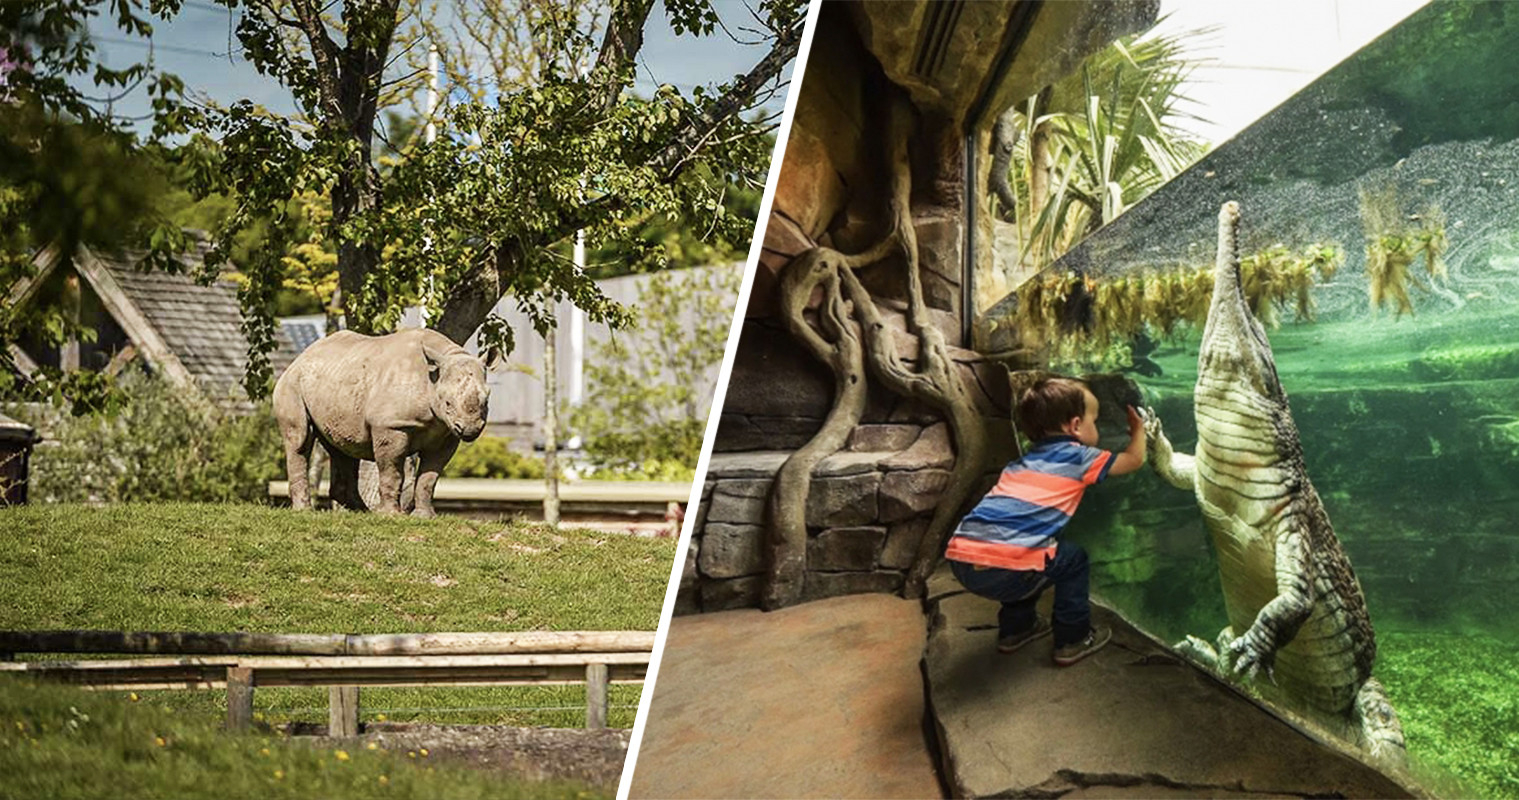 knowsley safari park or chester zoo